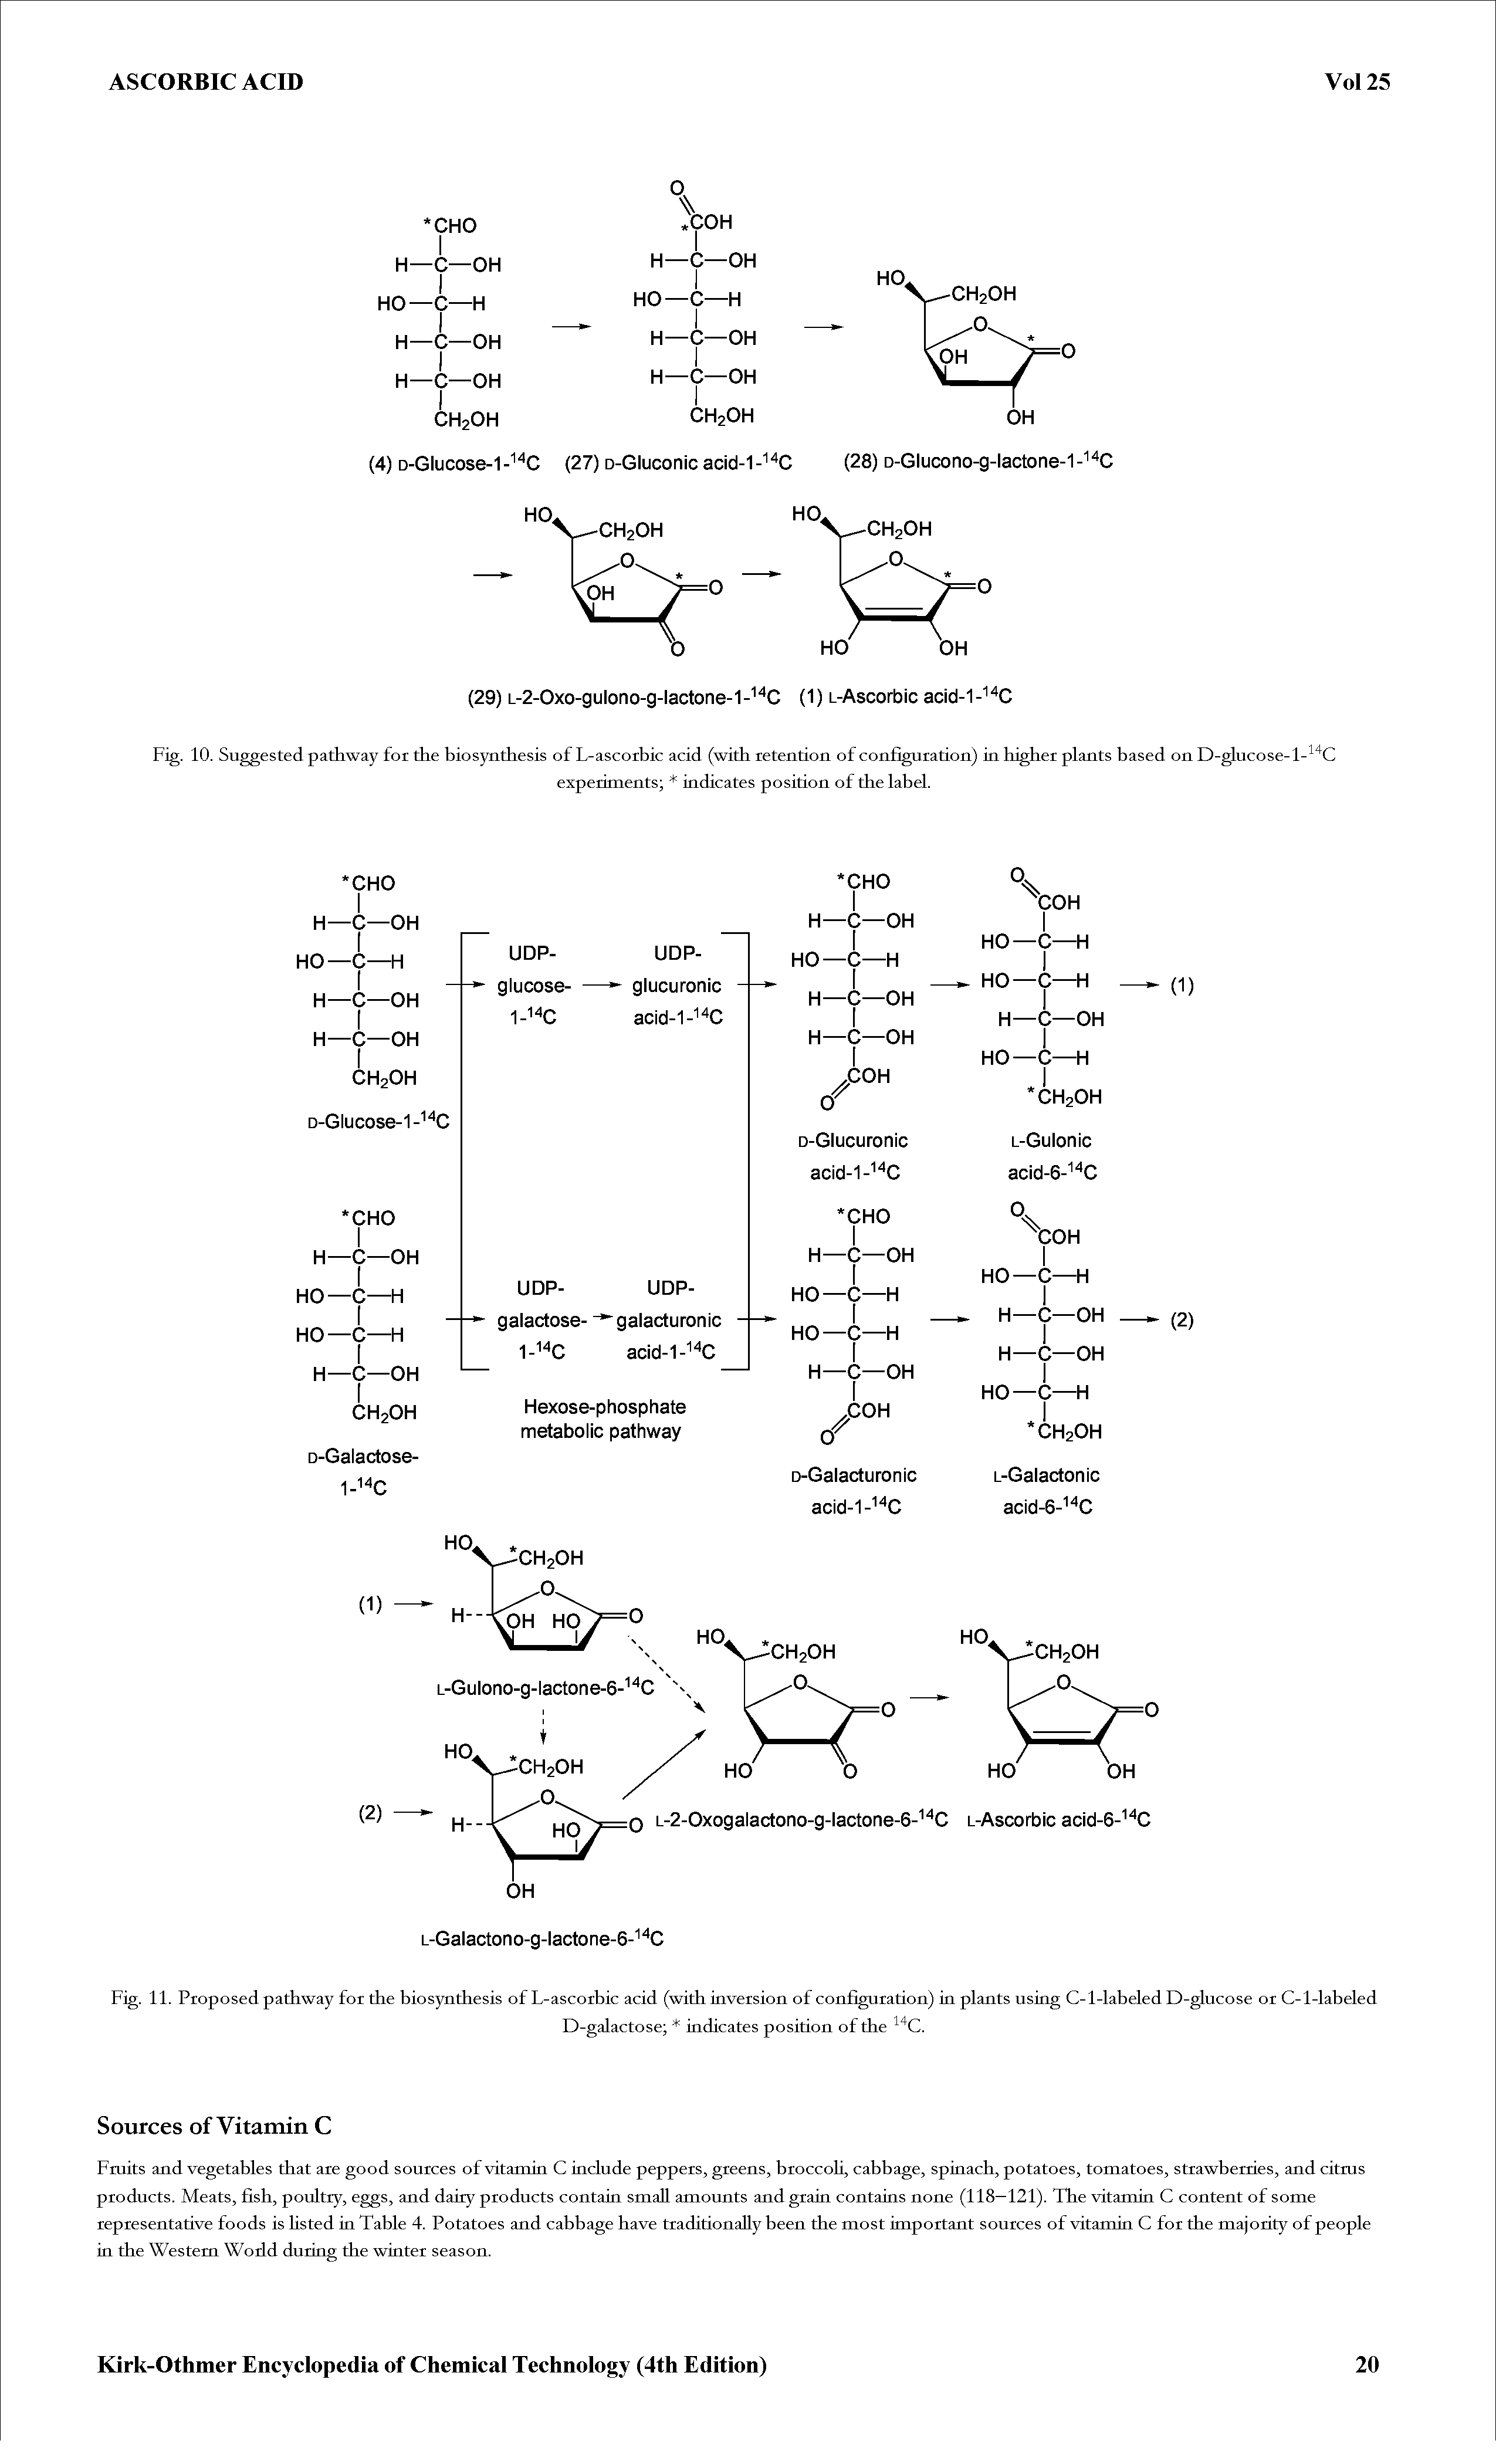 Fig. 10. Suggested pathway for the biosynthesis of L-ascorbic acid (with retention of configuration) in higher plants based on D-glucose-l- C...